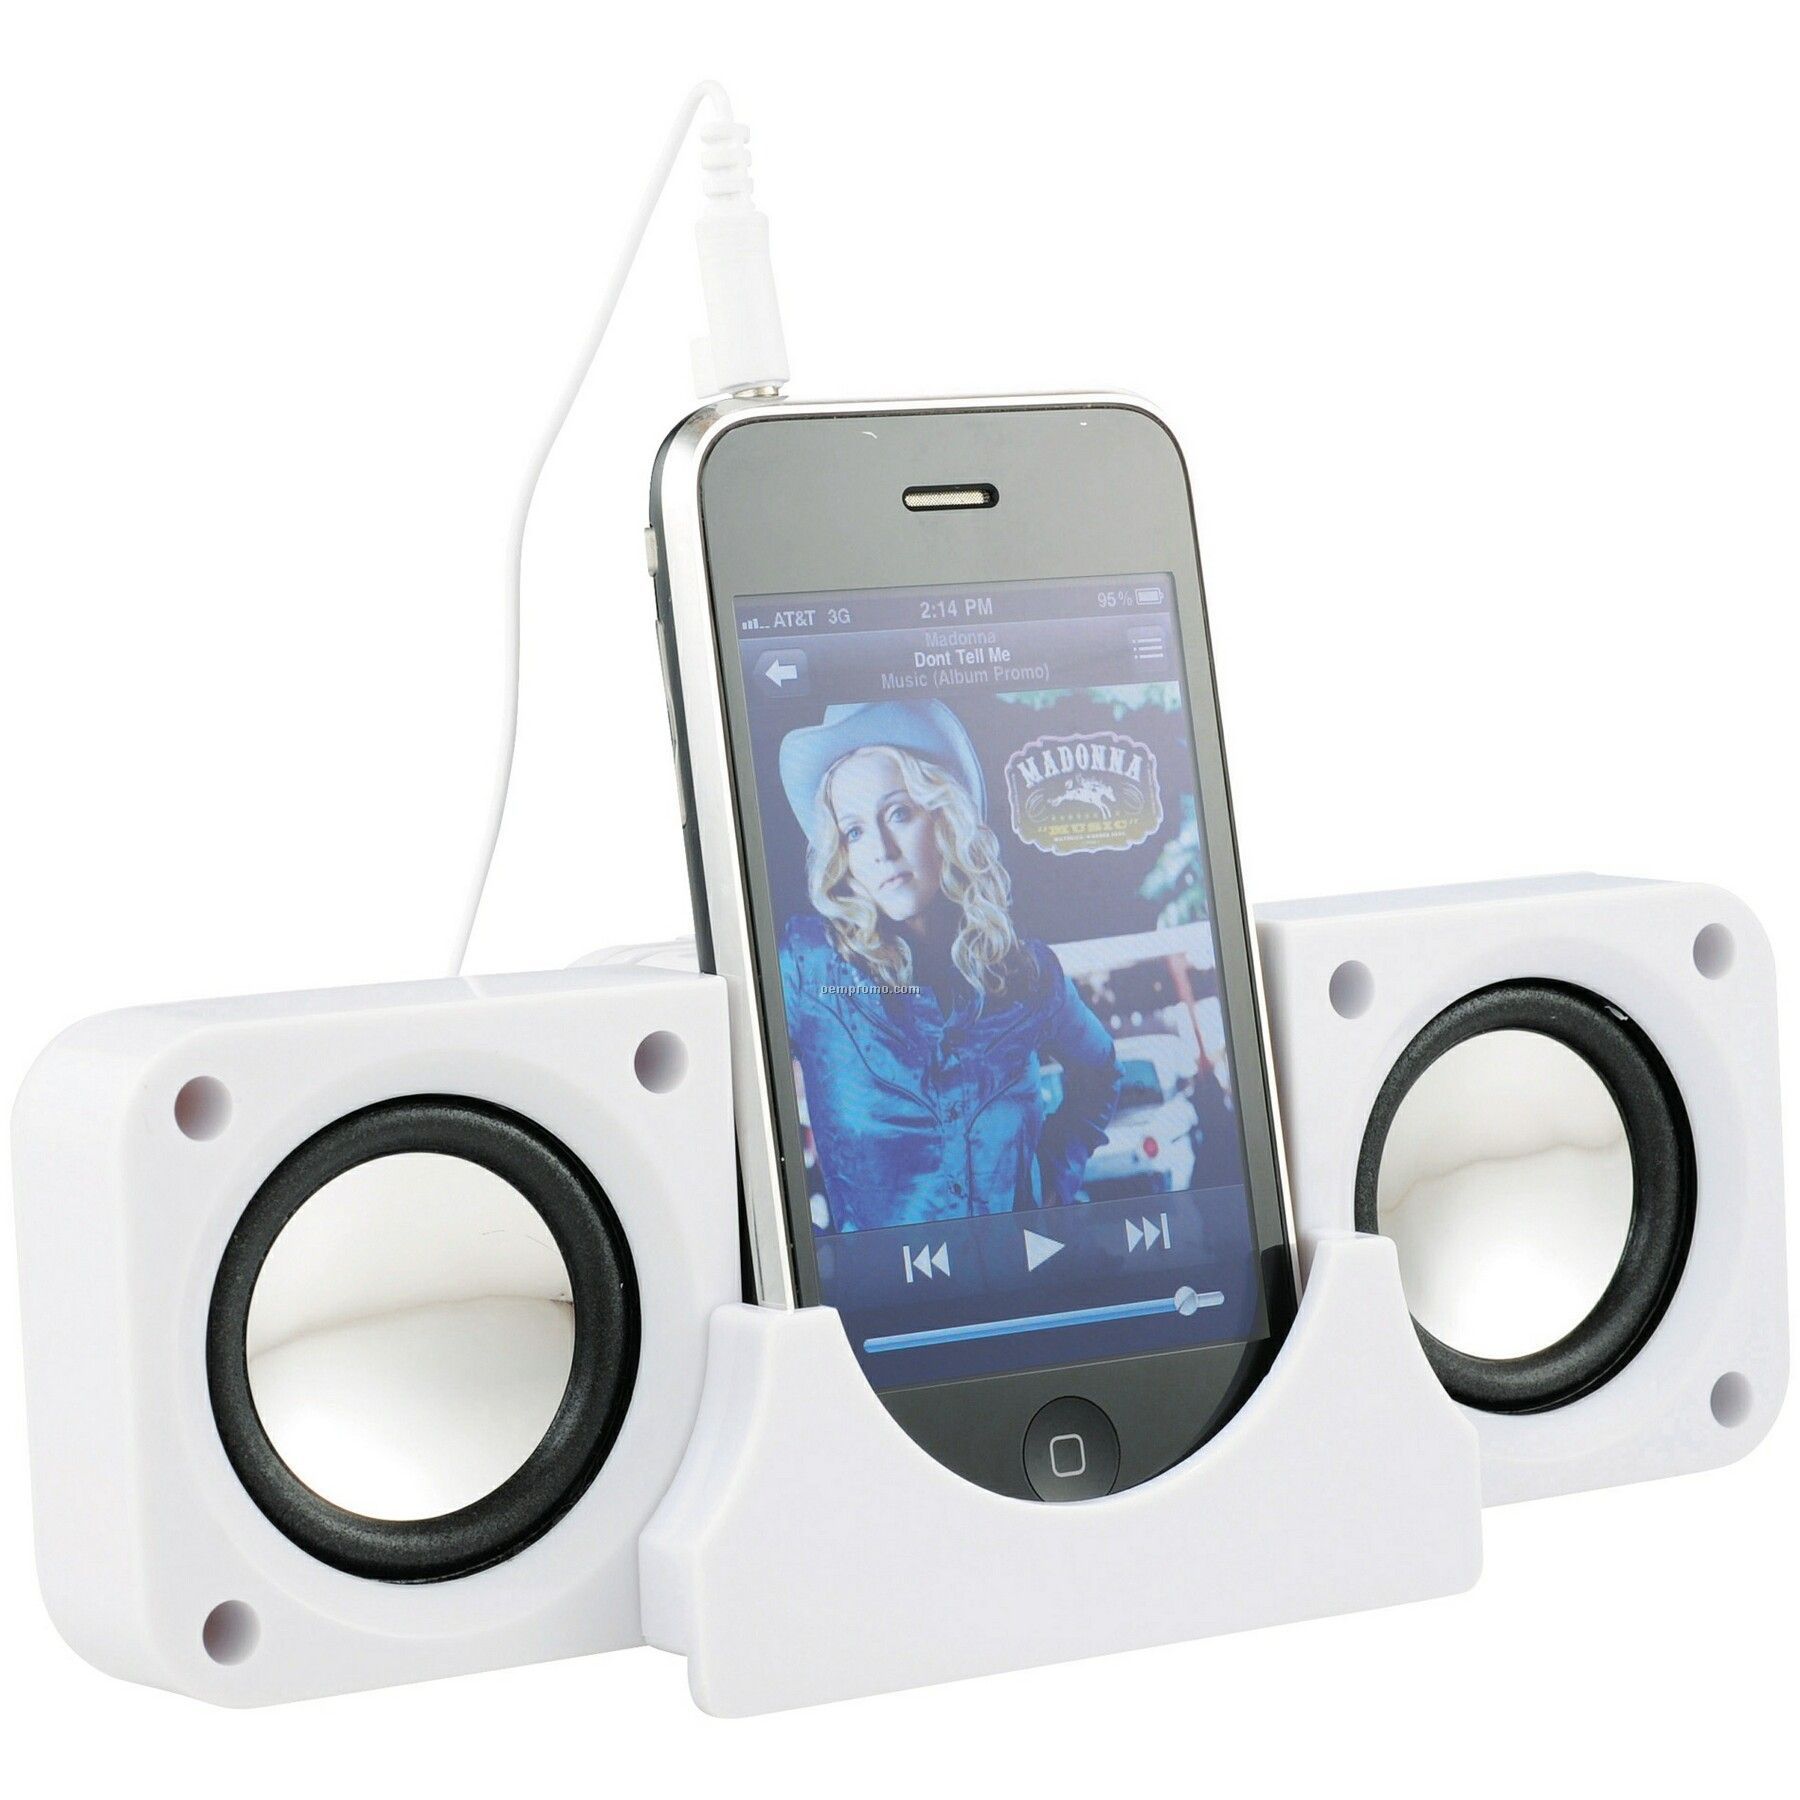 Tag Along Mp3 Speakers